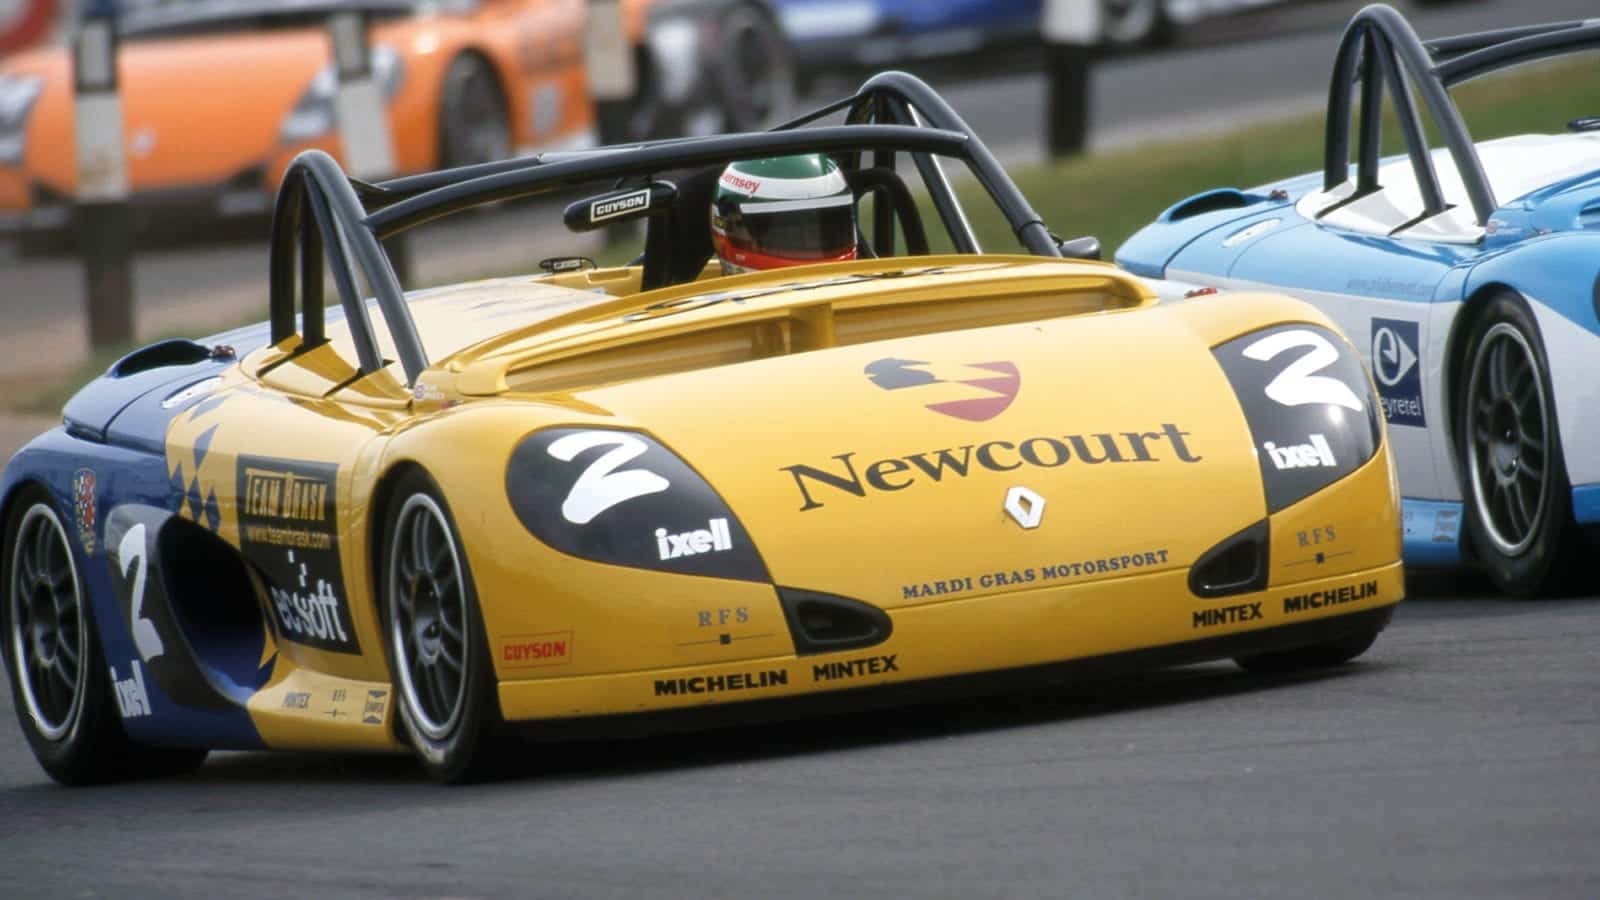 Andy Priaulx races a Renault Sport Spider